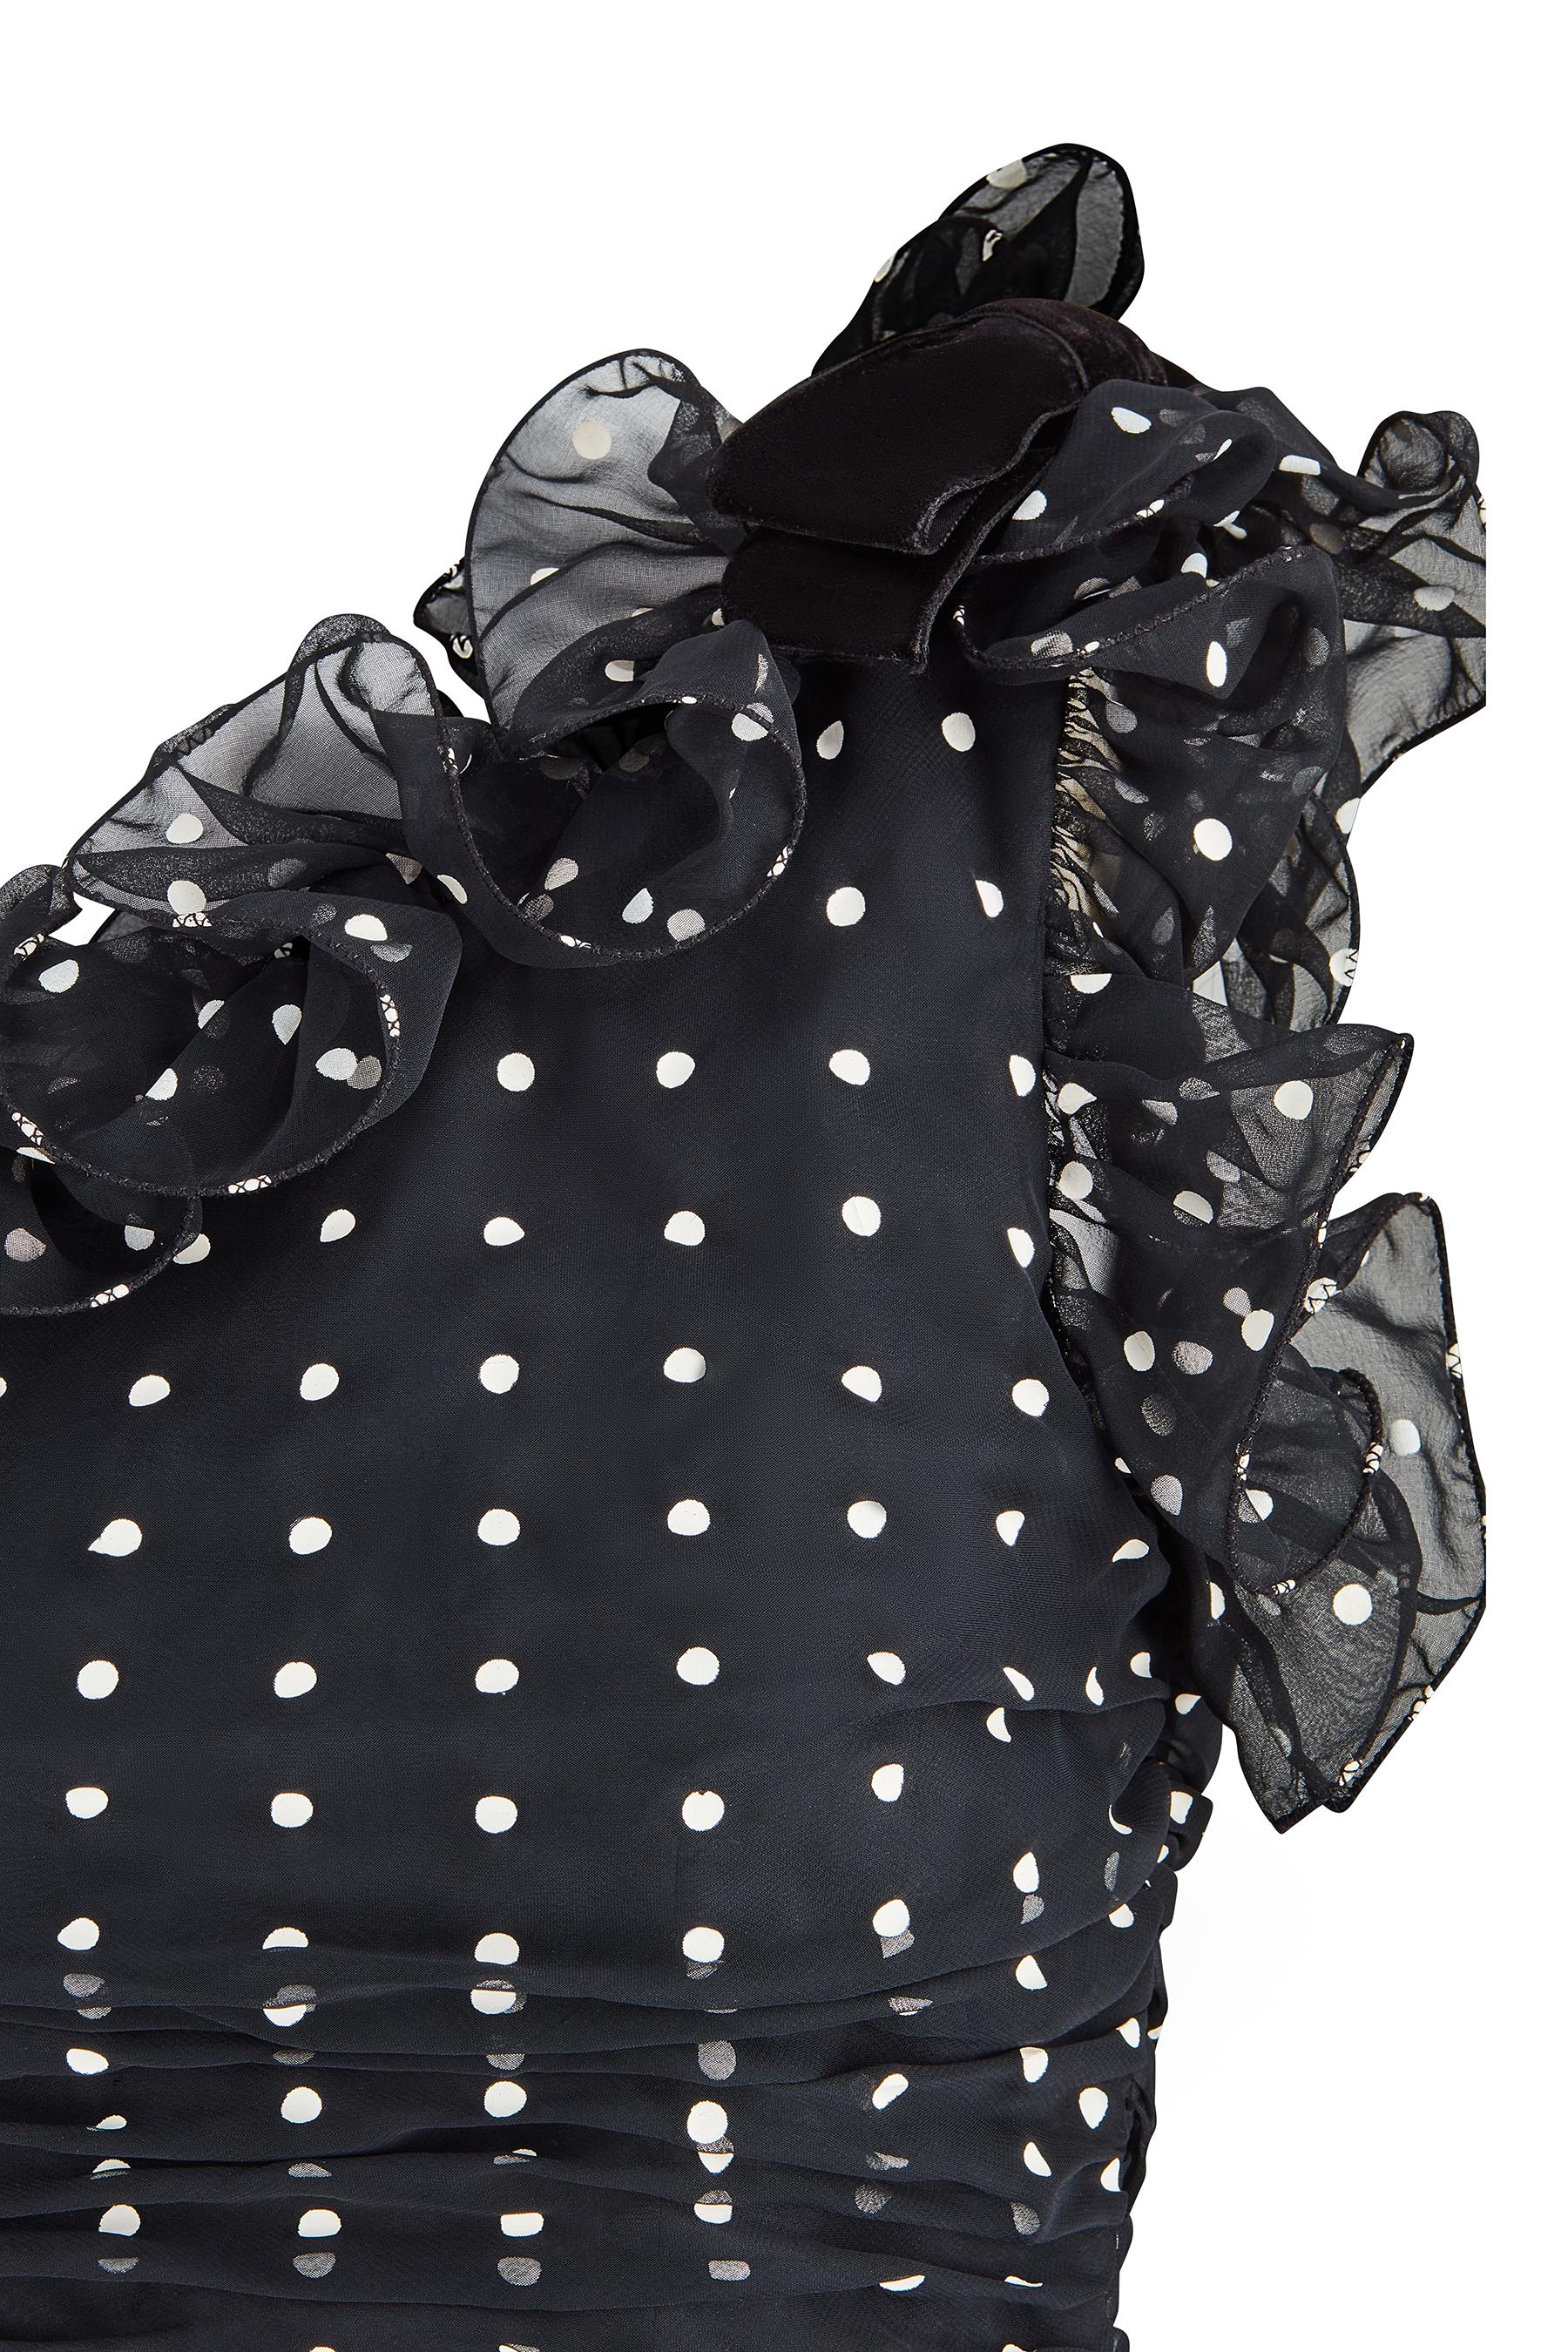 Women's 1990s Victor Costa Black and White Polkadot Ruffle Dress For Sale